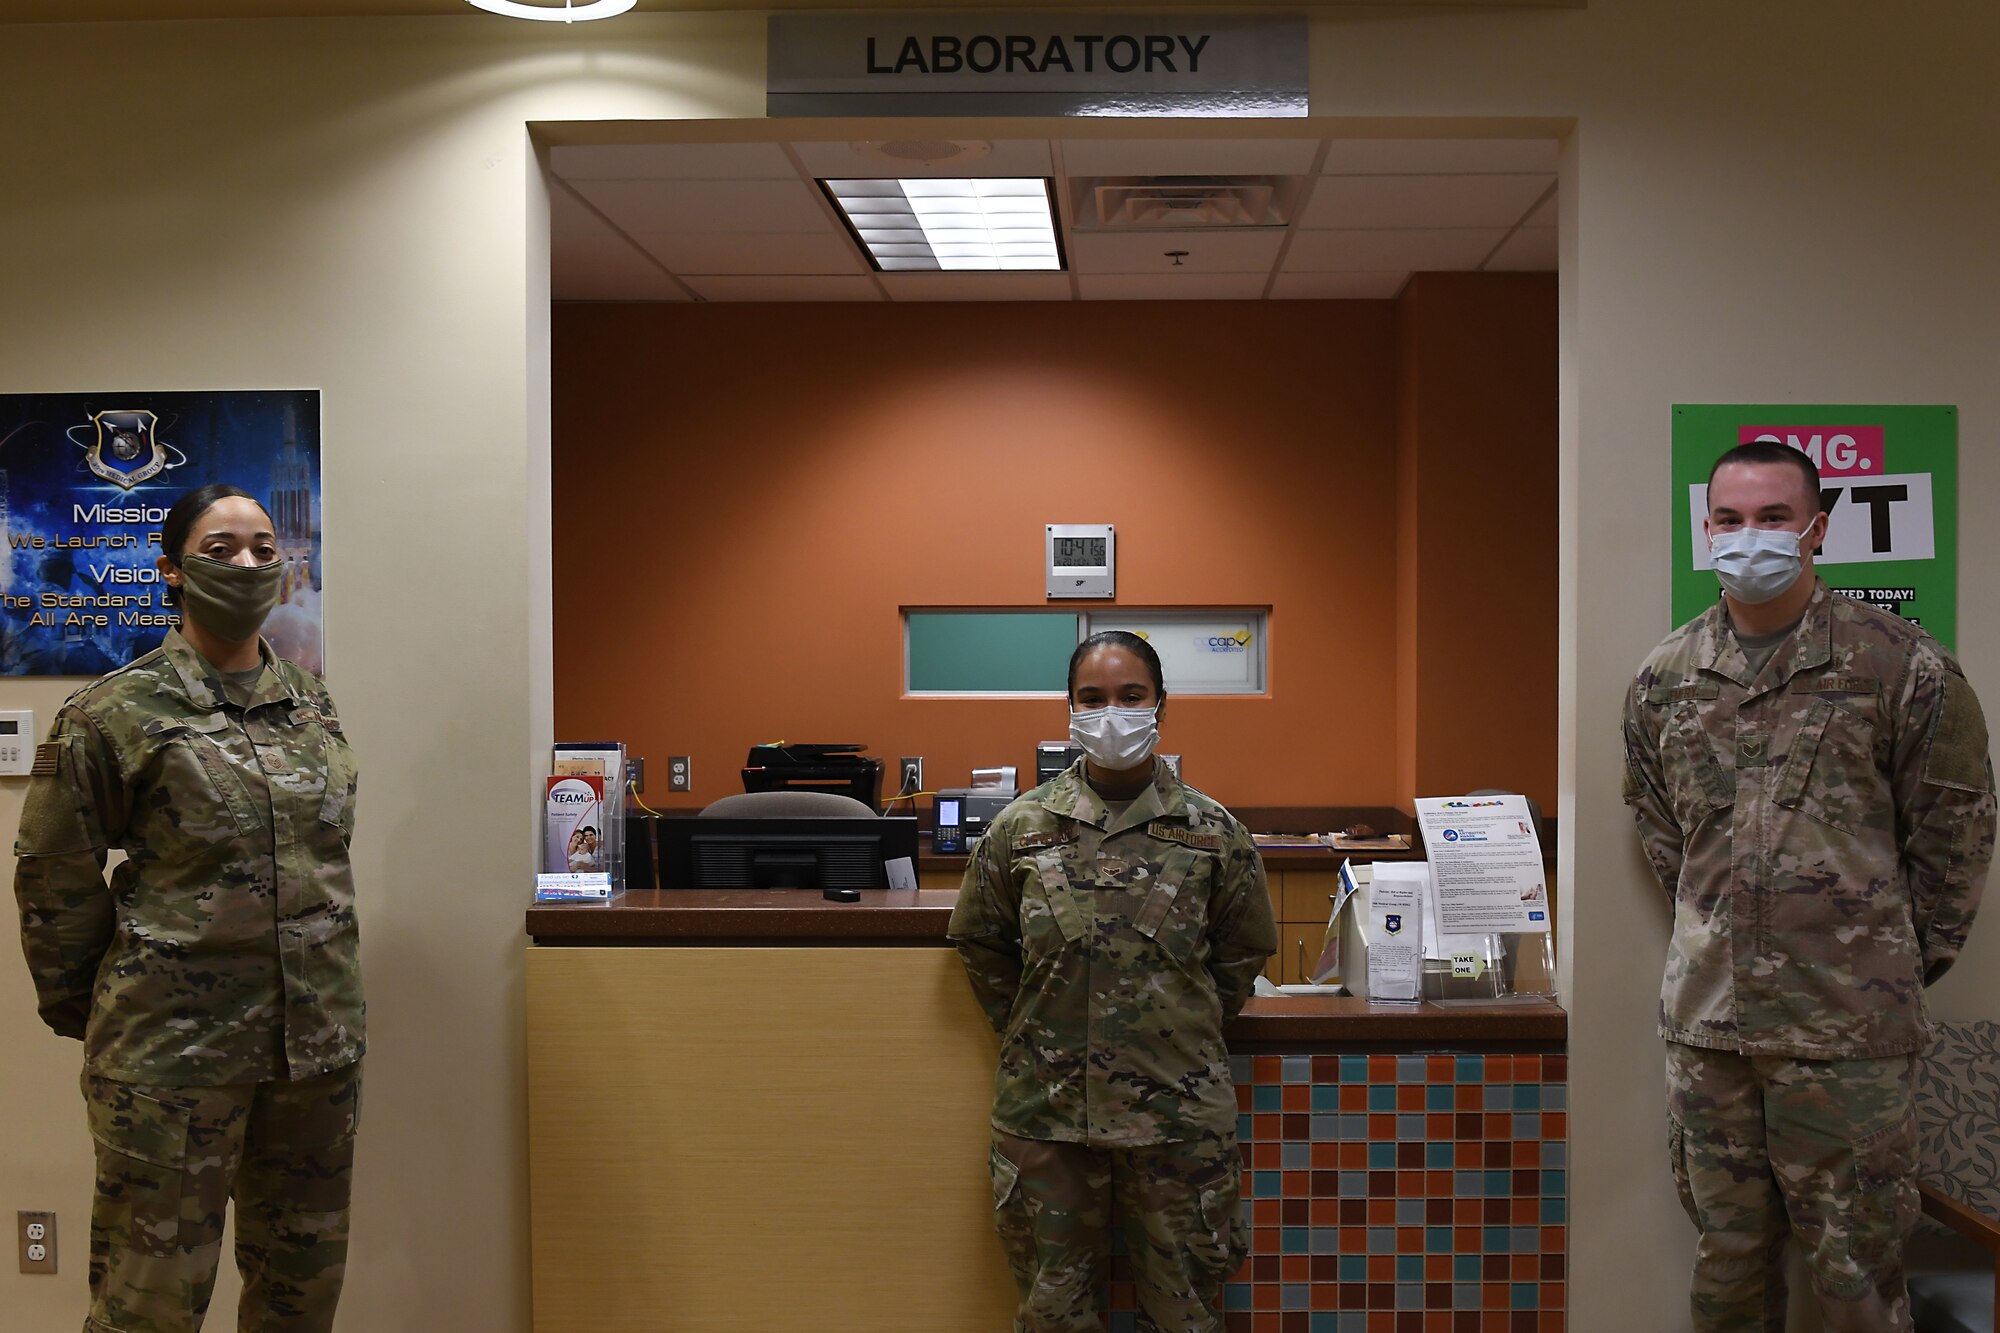 Members assigned to the 30th Healthcare Operations Squadron Laboratory pose for a photo in celebration of Medical Laboratory Professionals Week, also known as Lab Week, April 20, 2020, at Vandenberg Air Force Base, Calif.